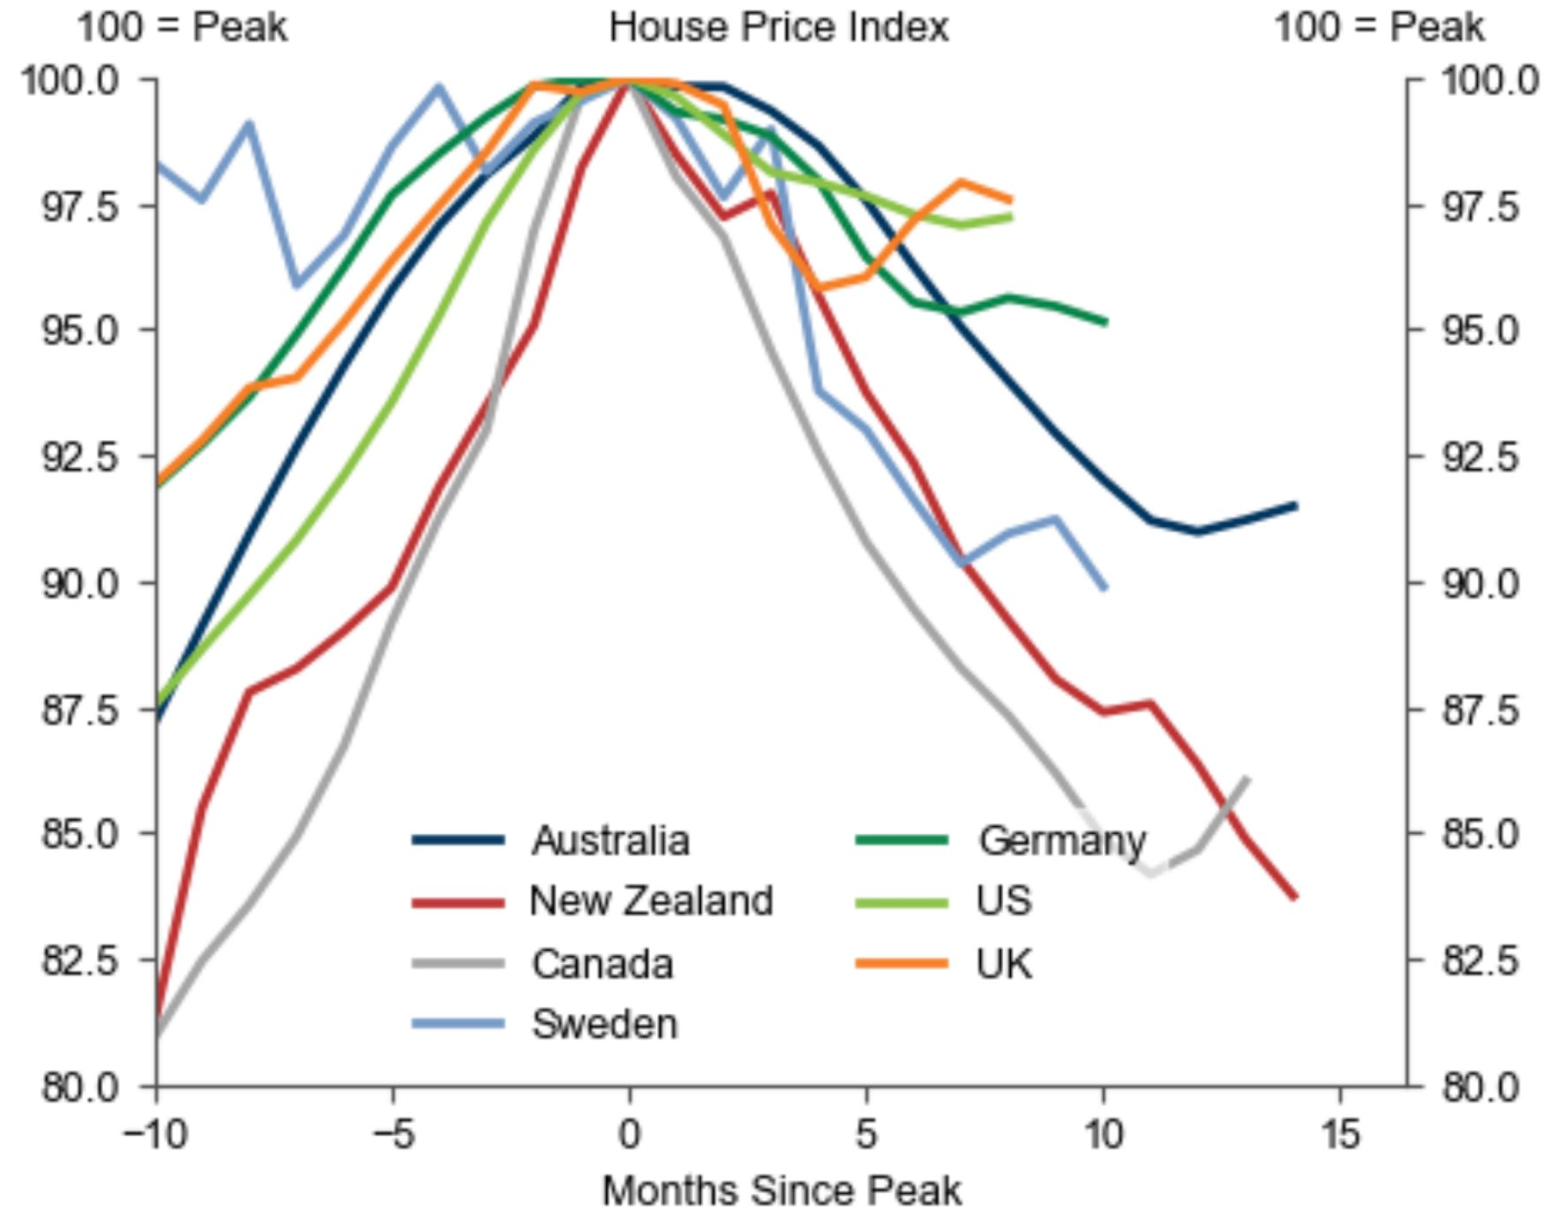 Global house price bust